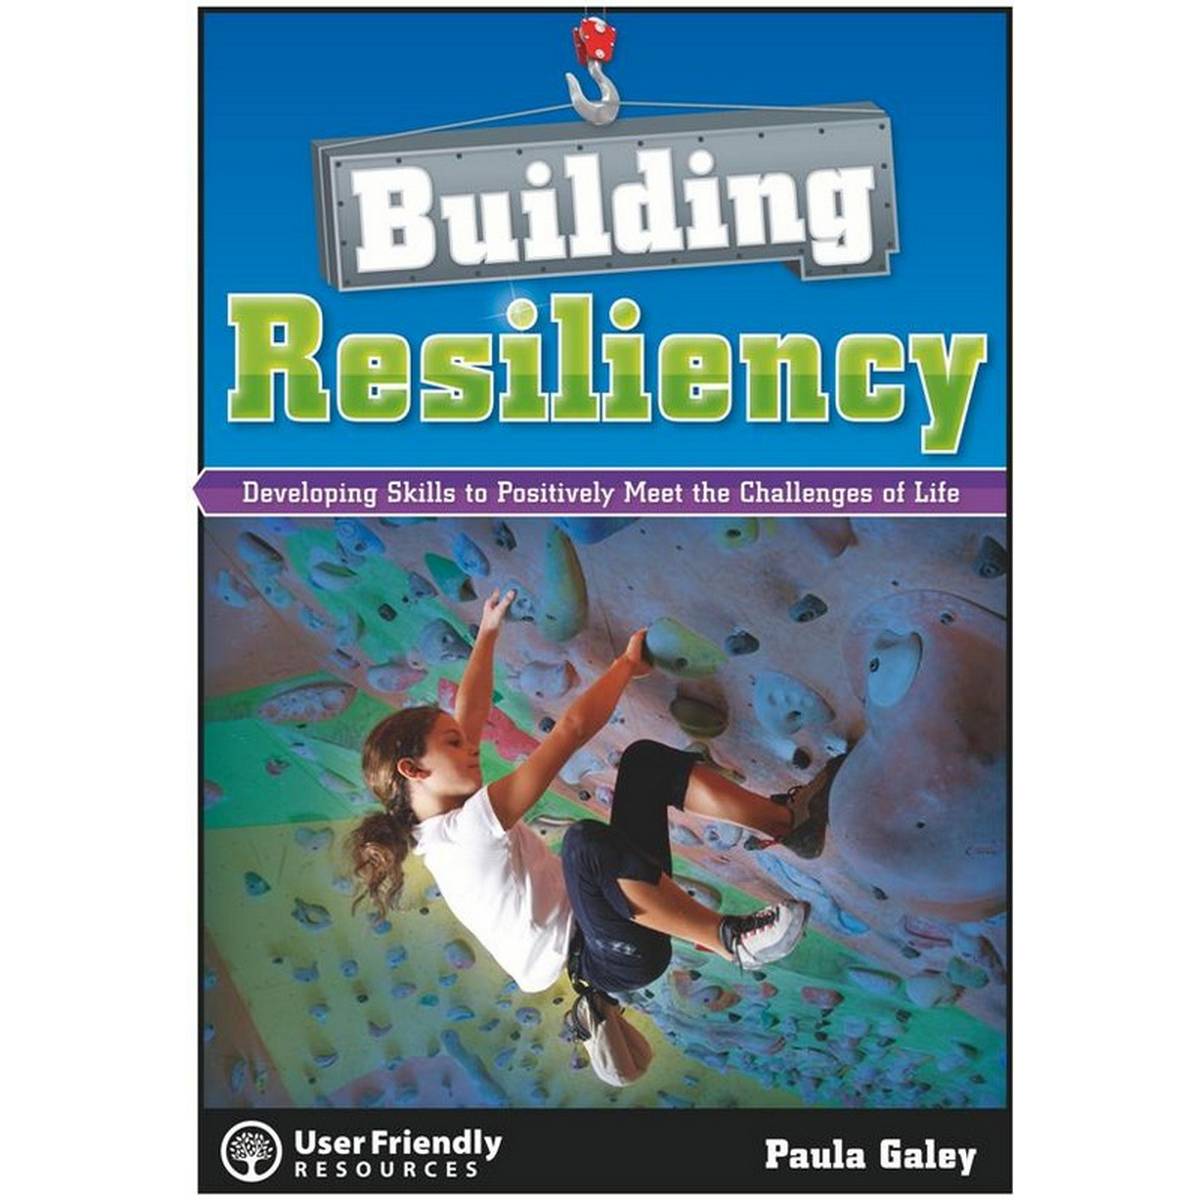 Building Resilience: Developing Skills to Positively Meet the Challenges of Life